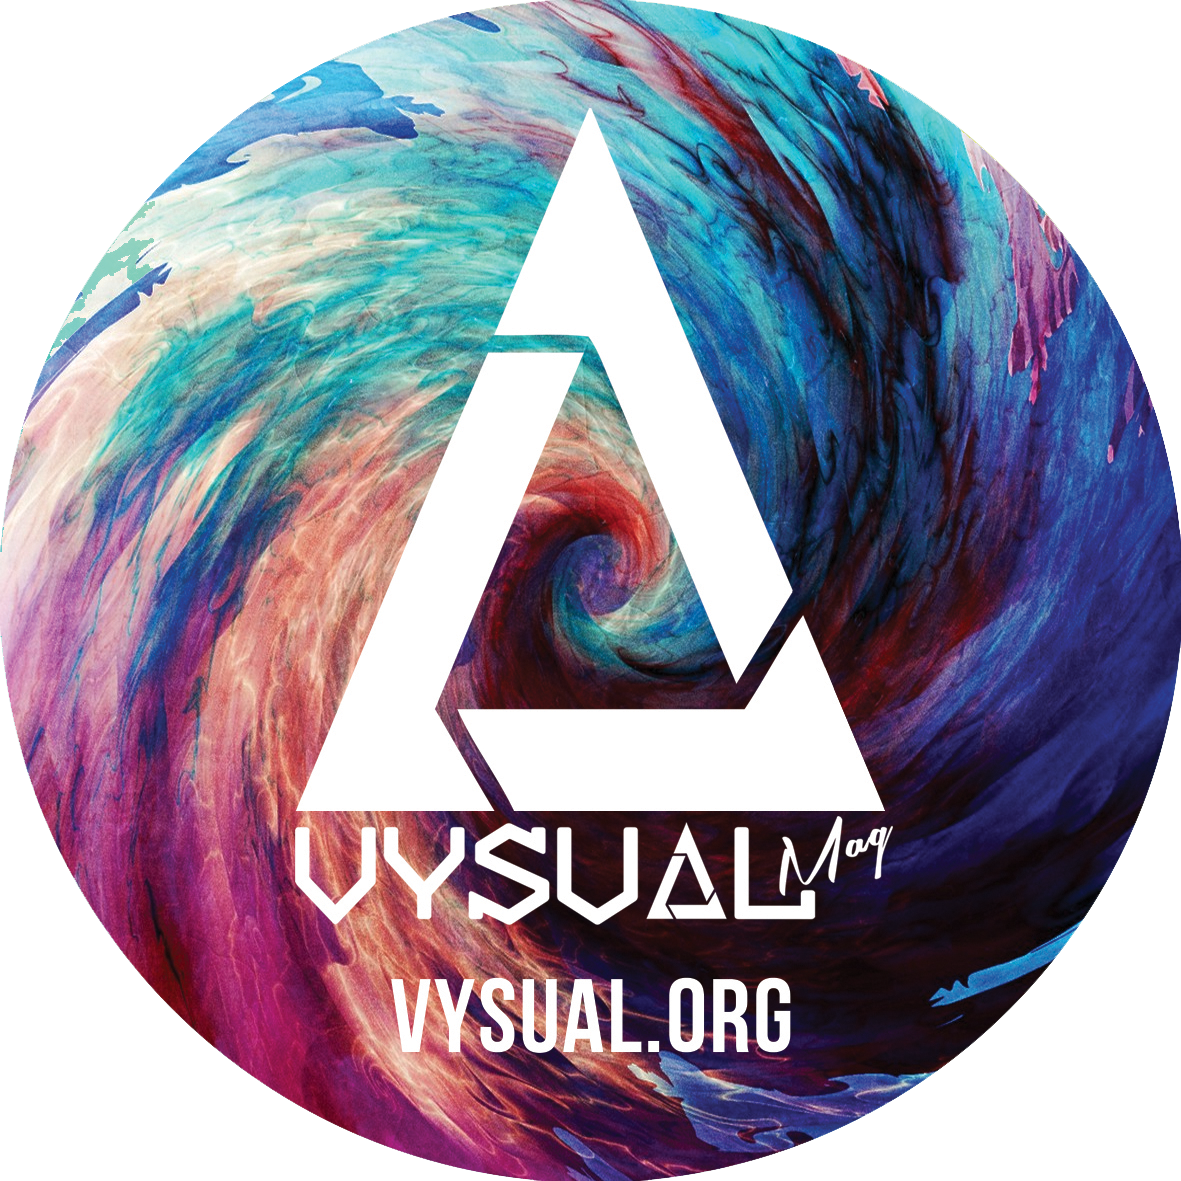 vysual vysual mag webmagazine design aesthetic video code Audio photo Style open innovation open redaction